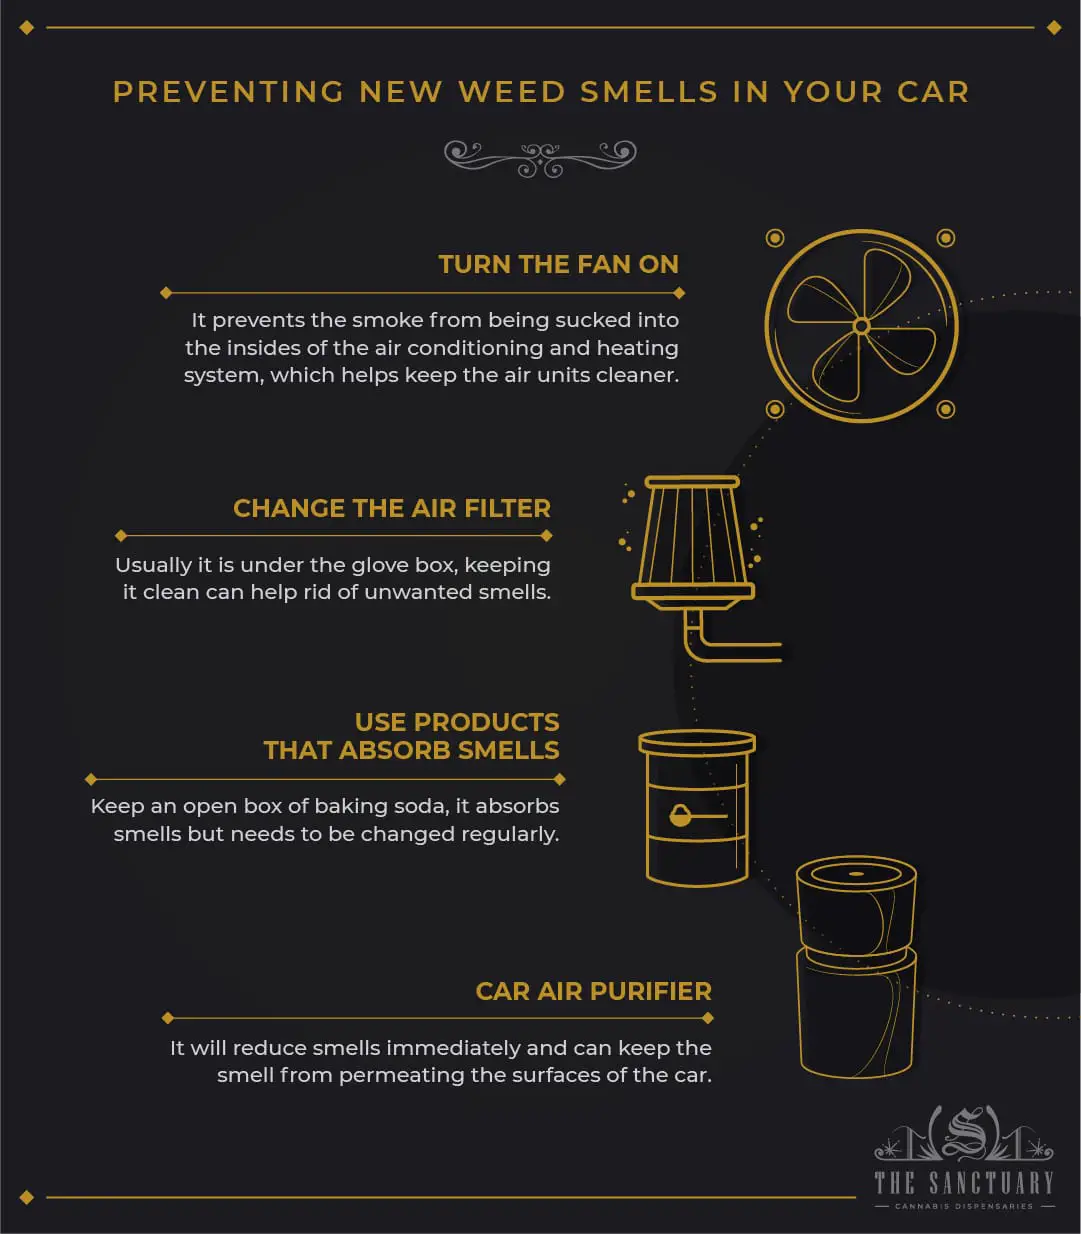 How To Get Weed Smell Out Of Your Car?